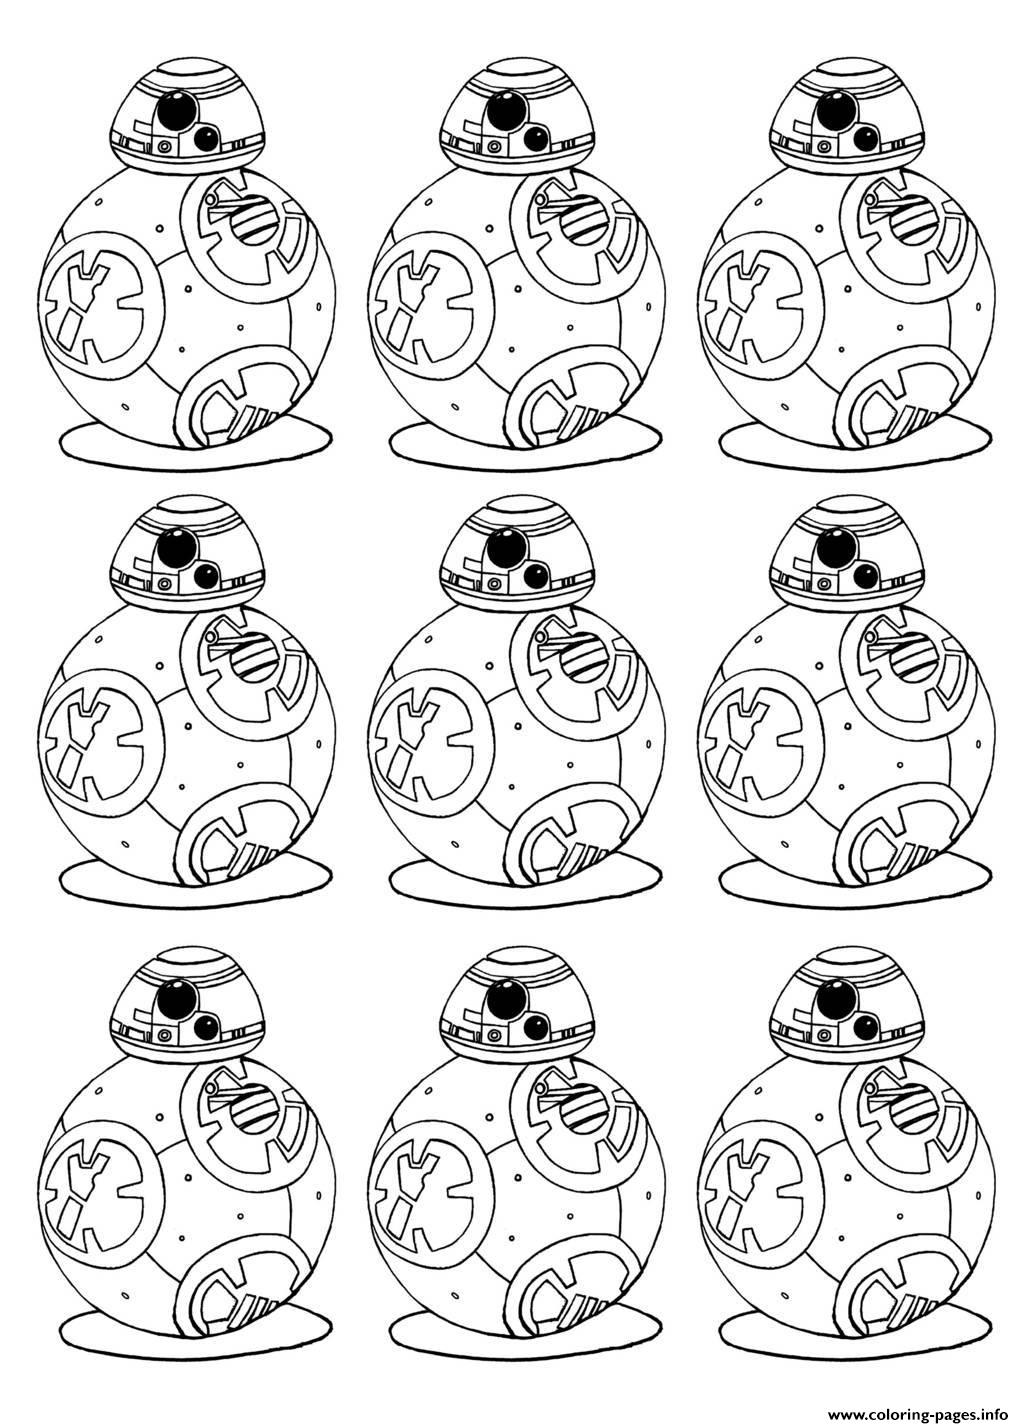 Adult Bb 8 Star Wars 7 The Force Awakens Bb8 Robot coloring